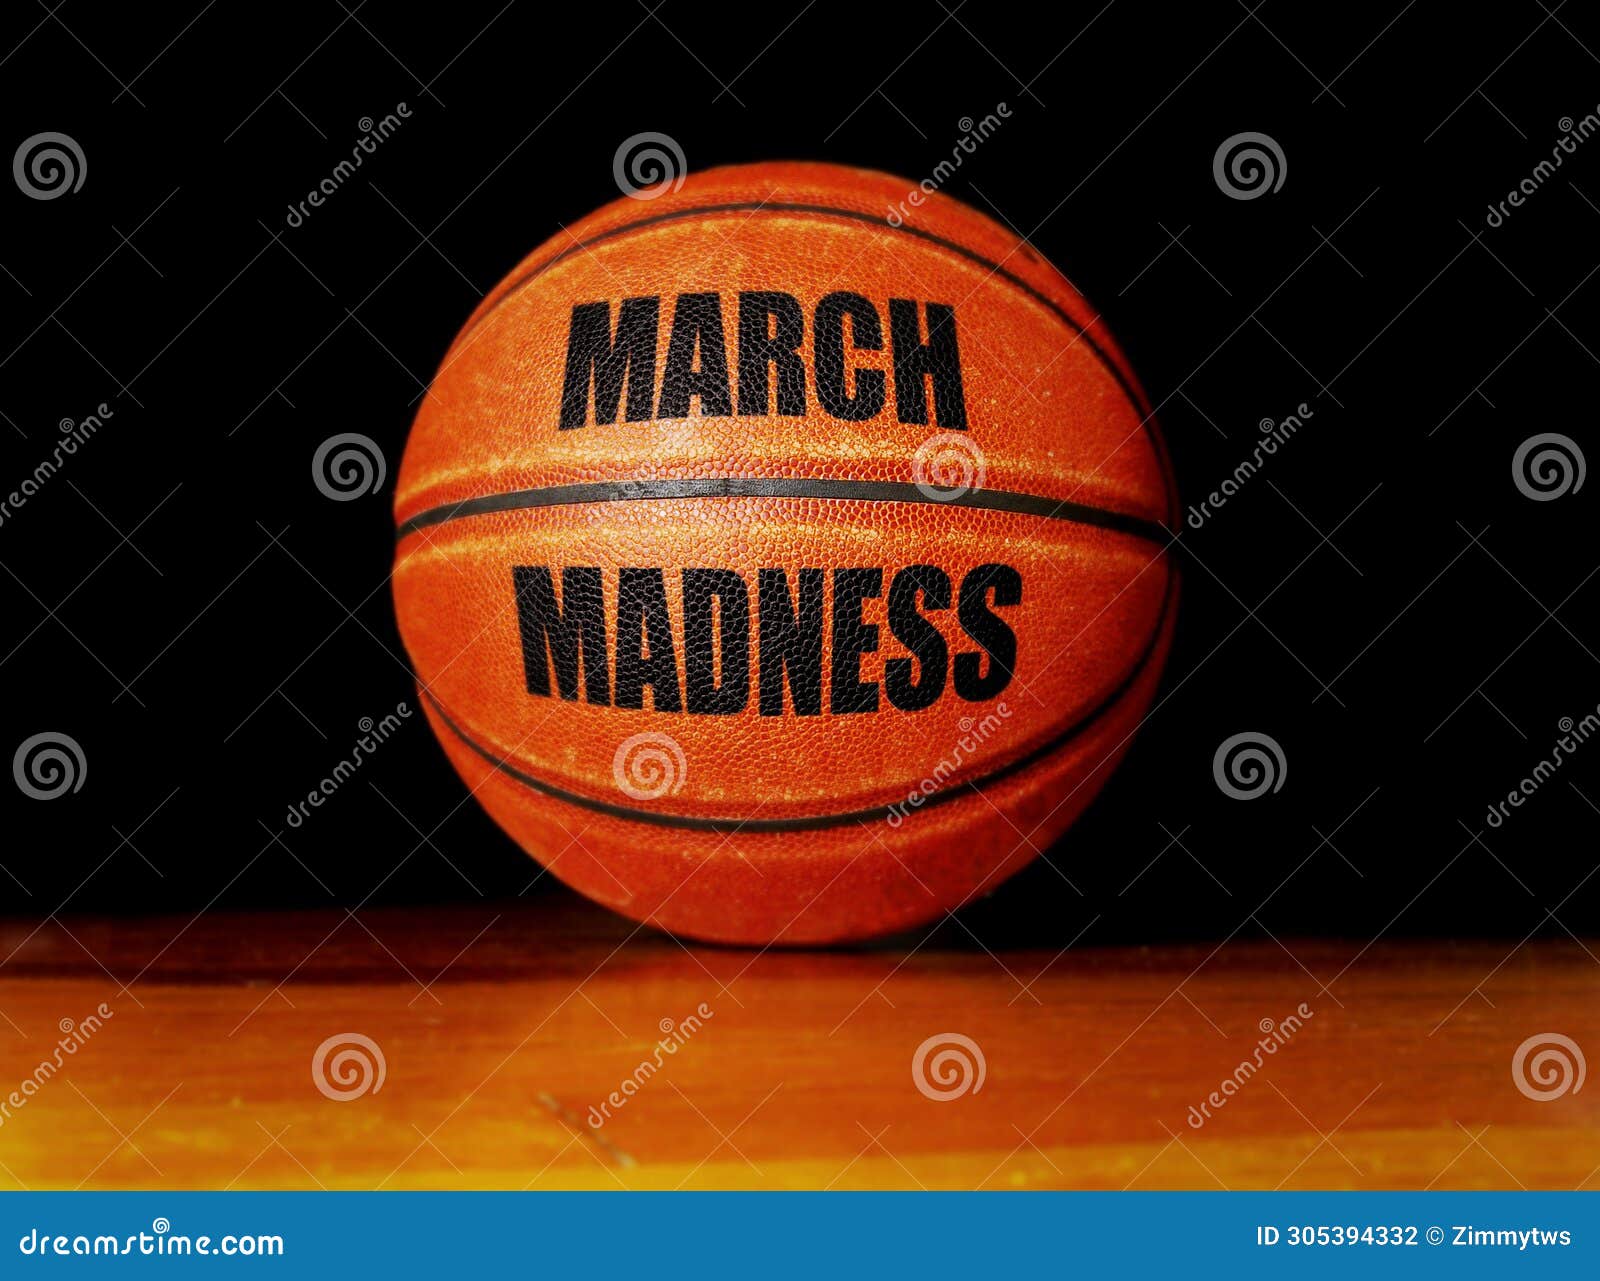 march madness basketball on a hardwood court, college basketball tournament concept